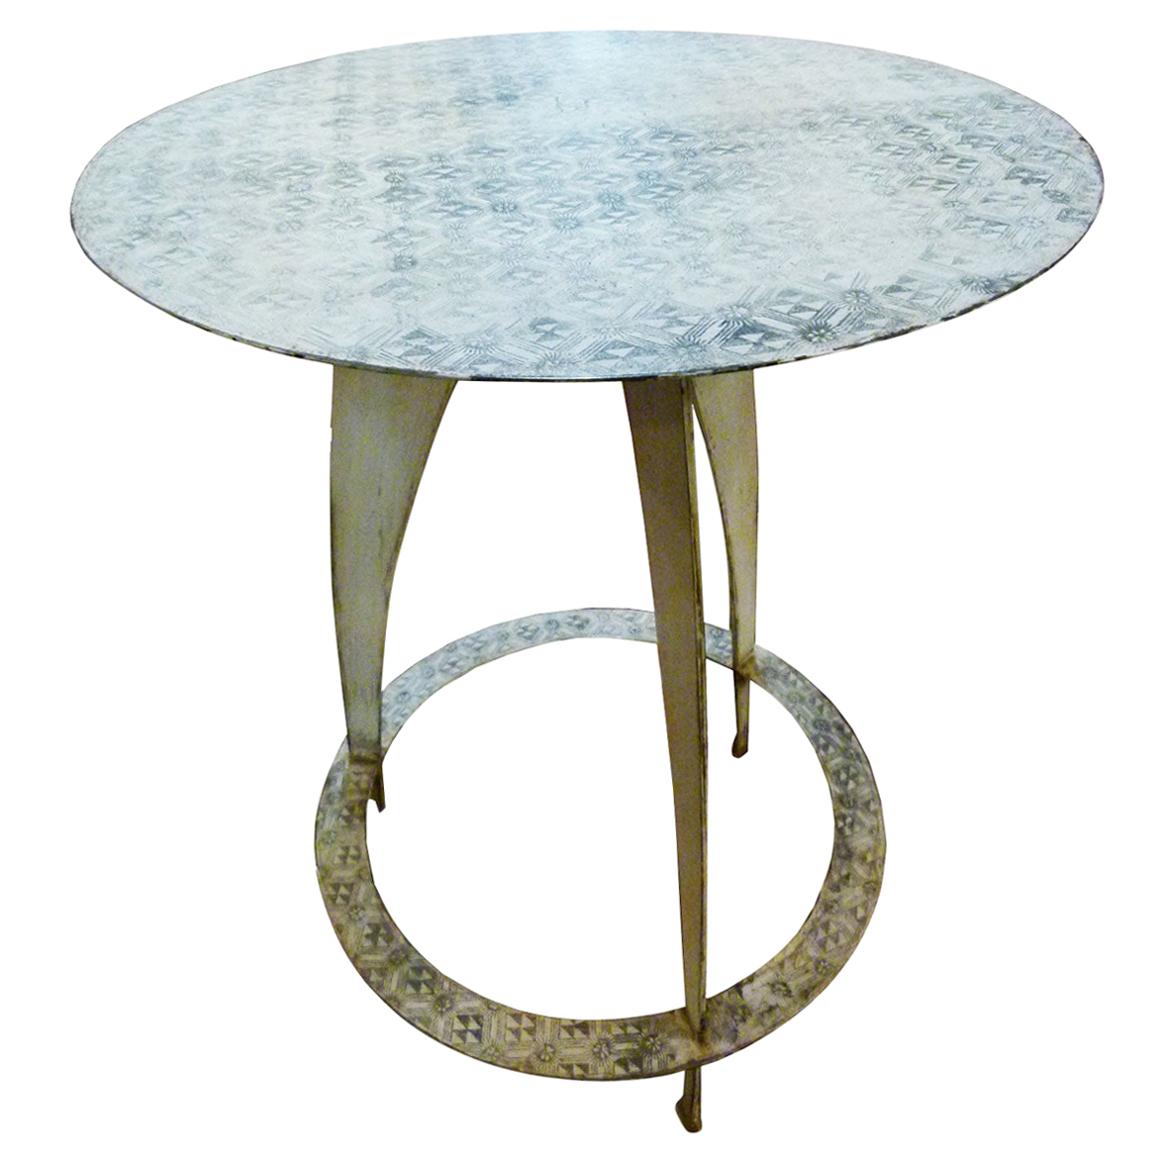 Contemporary French Round Iron Side Table, Painted with a Blue White Pattern